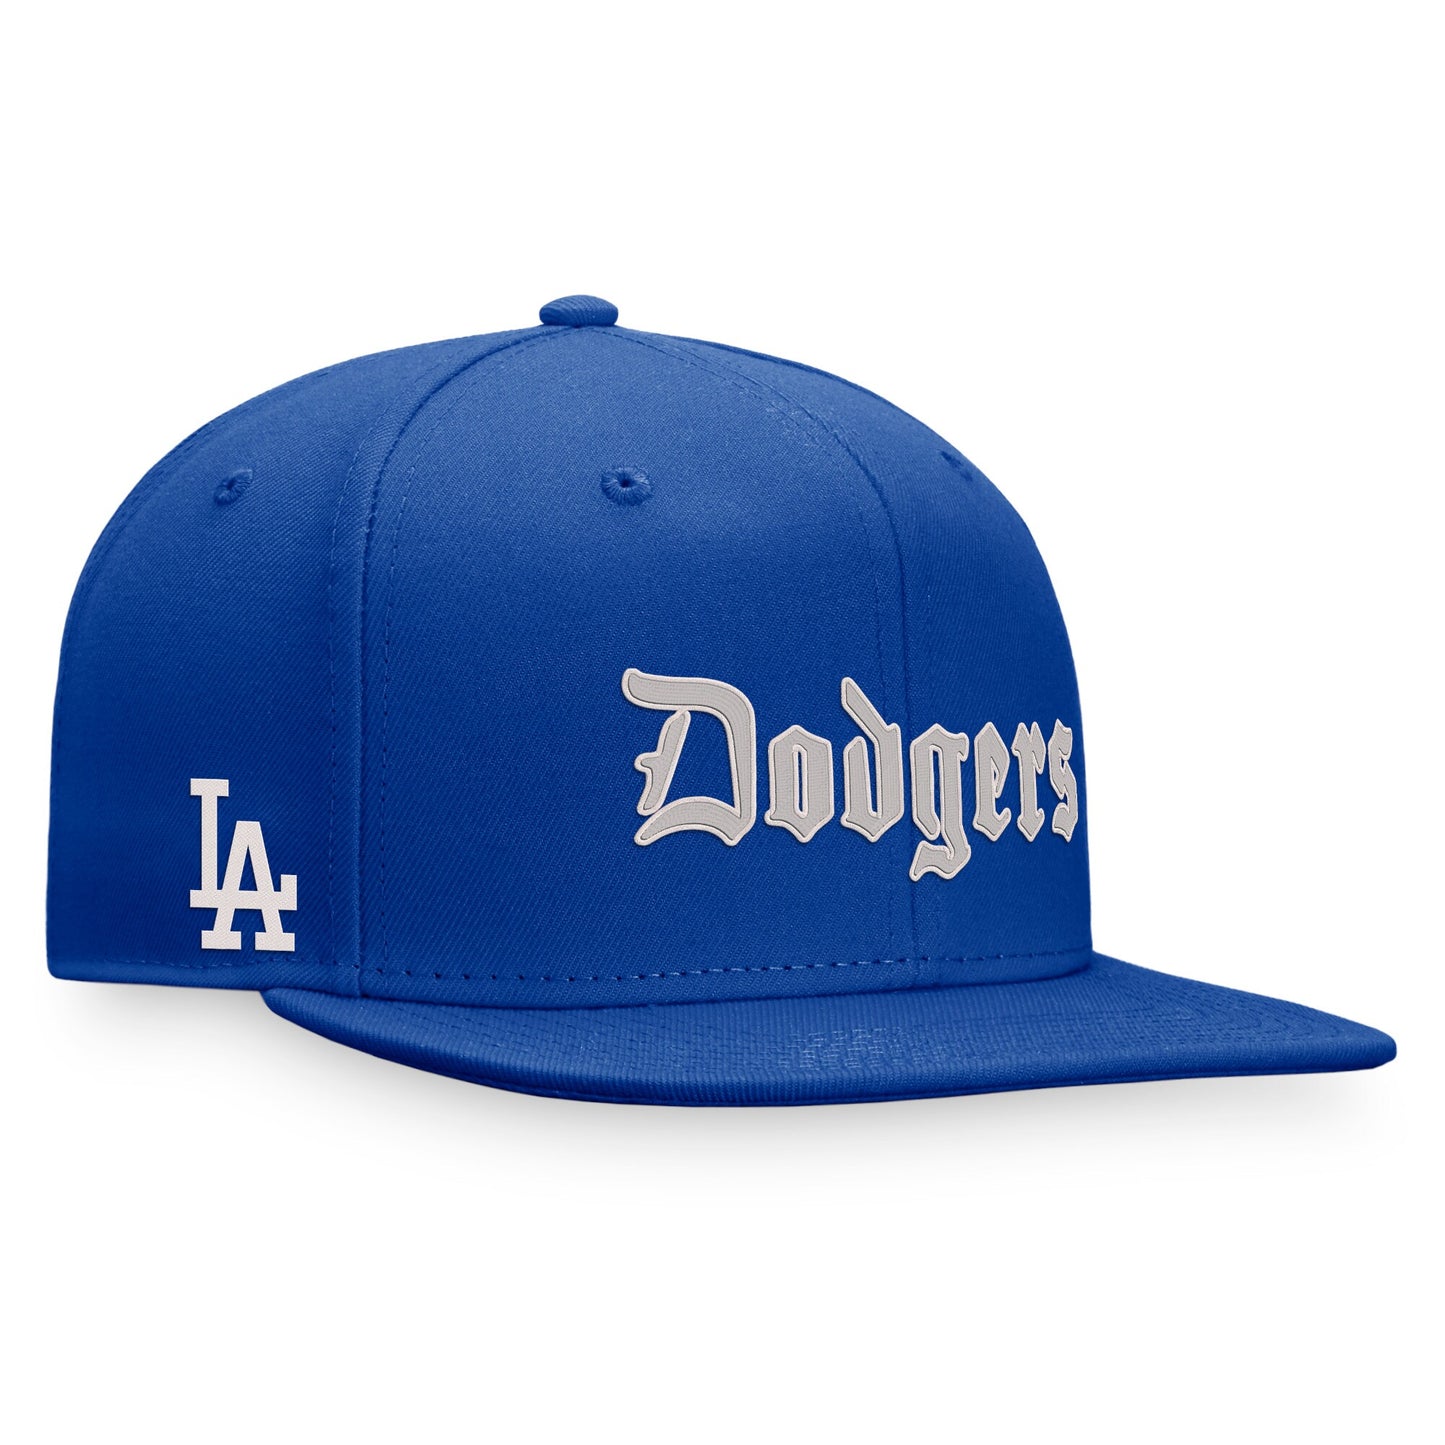 Los Angeles Dodgers Fanatics Branded Gothic Script Fitted Hat - Royal